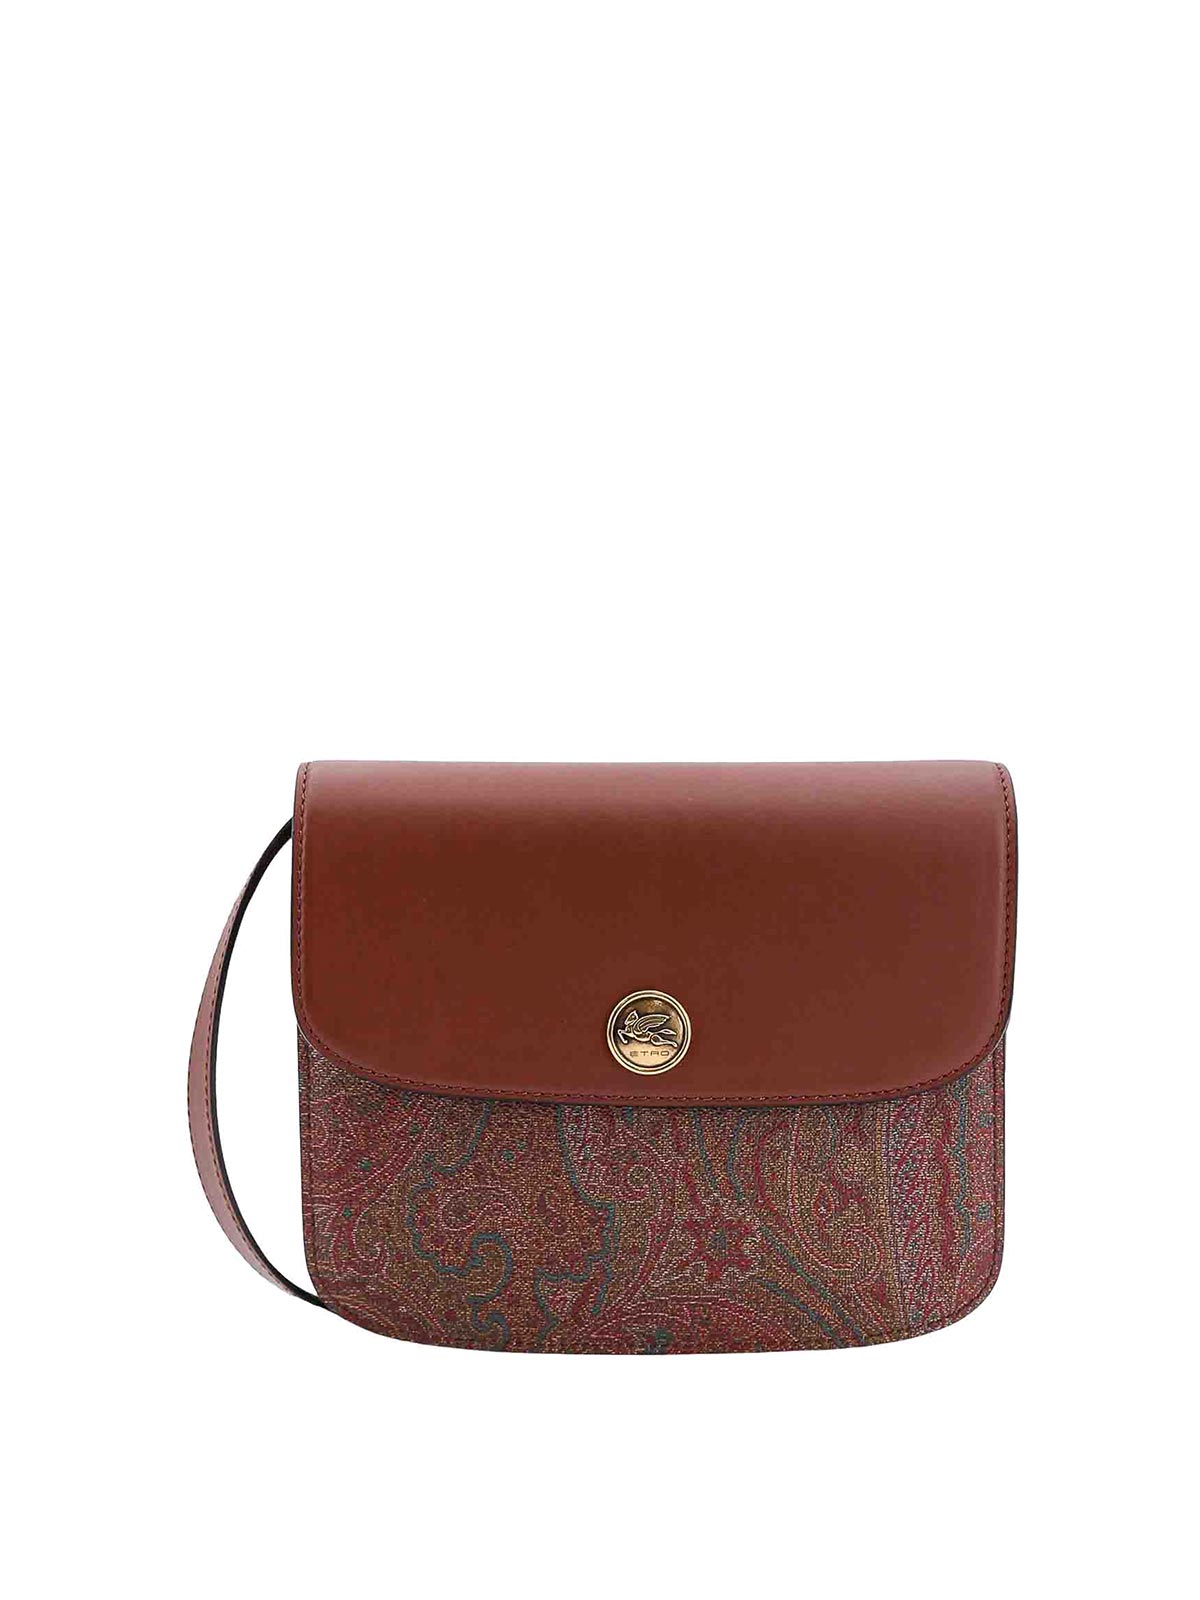 Etro Coated Canvas Bag Paisley Motif In Brown